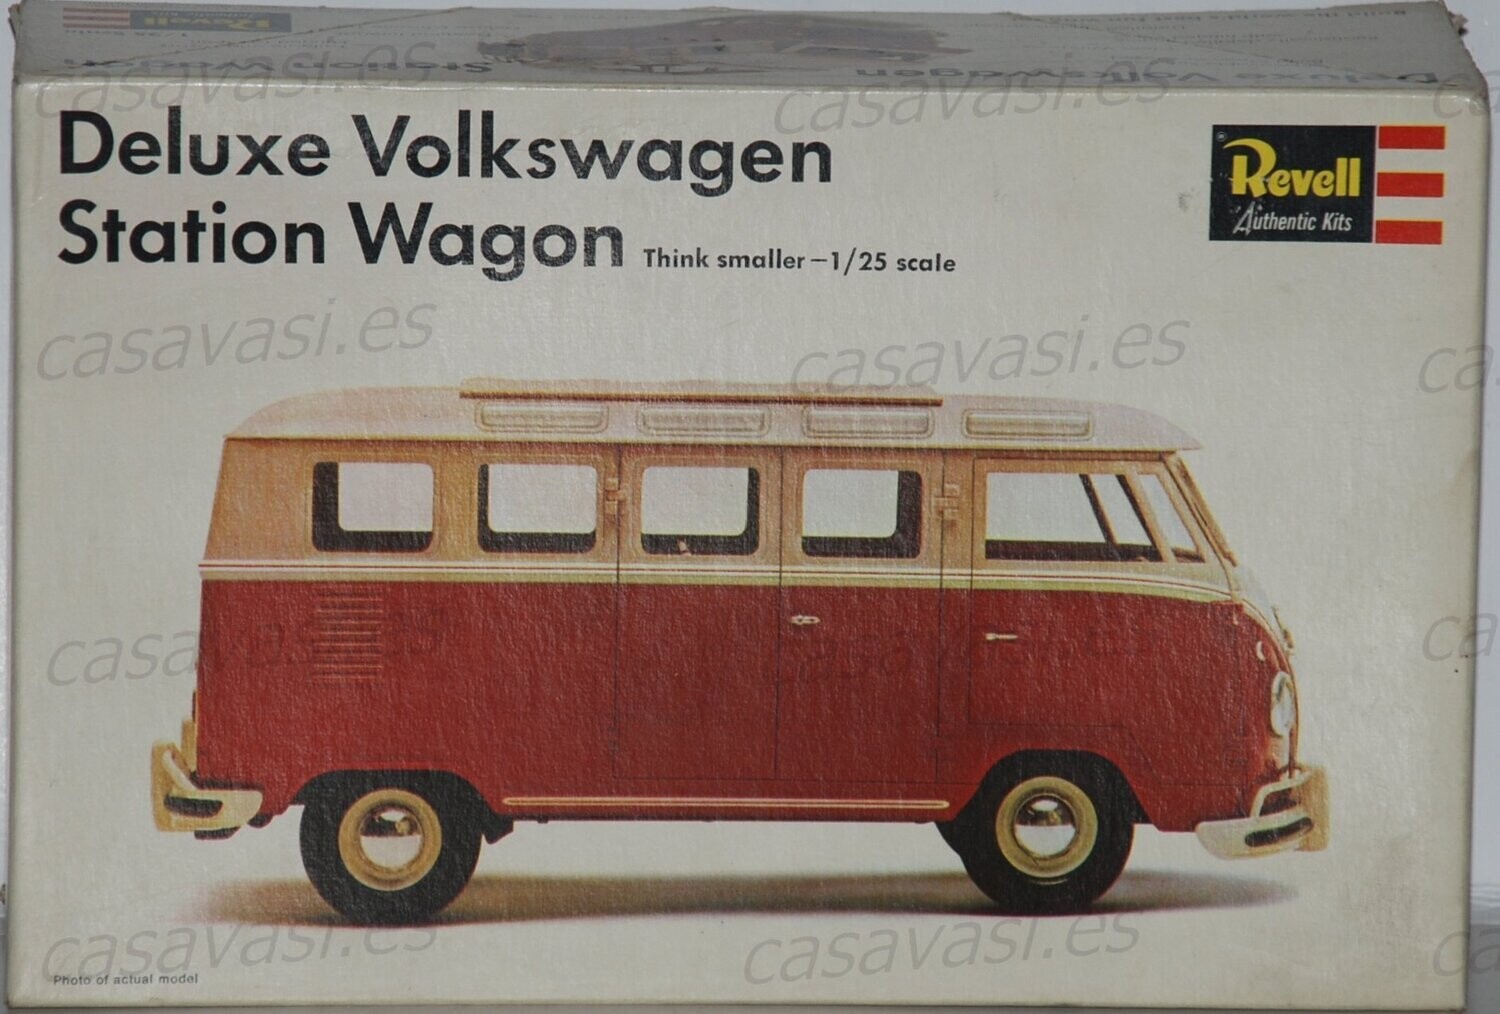 Revell - 1967 - h-1267 - 1/25 - Deluxe Volkswagen Station Wagon
Box Size 23 x 16 cm.